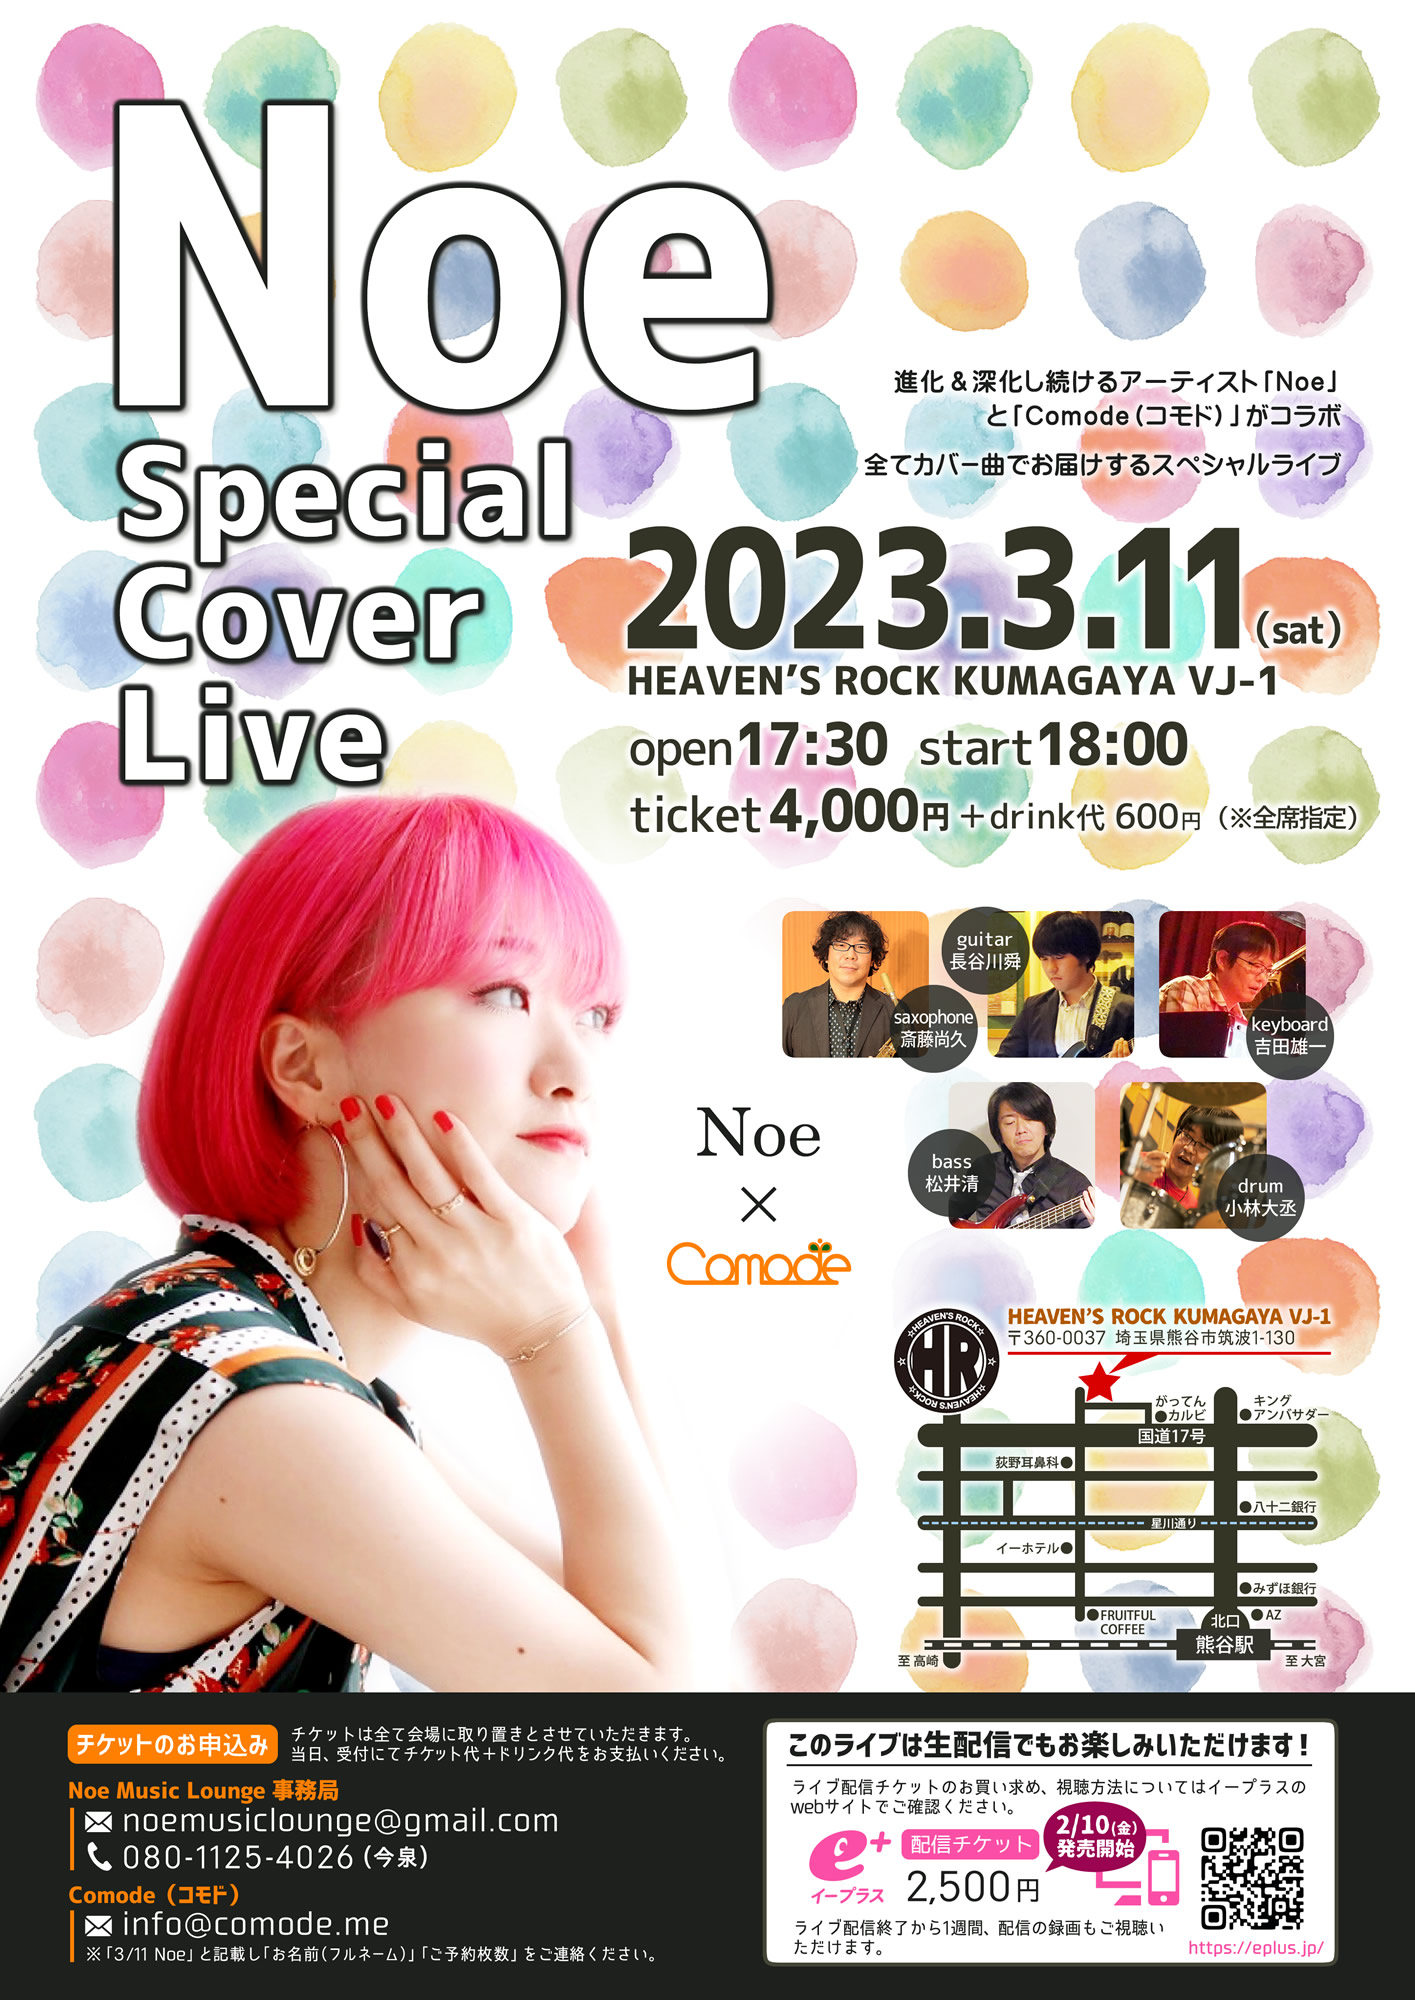 Noe Special Cover Live - Noe×Comode -” height=